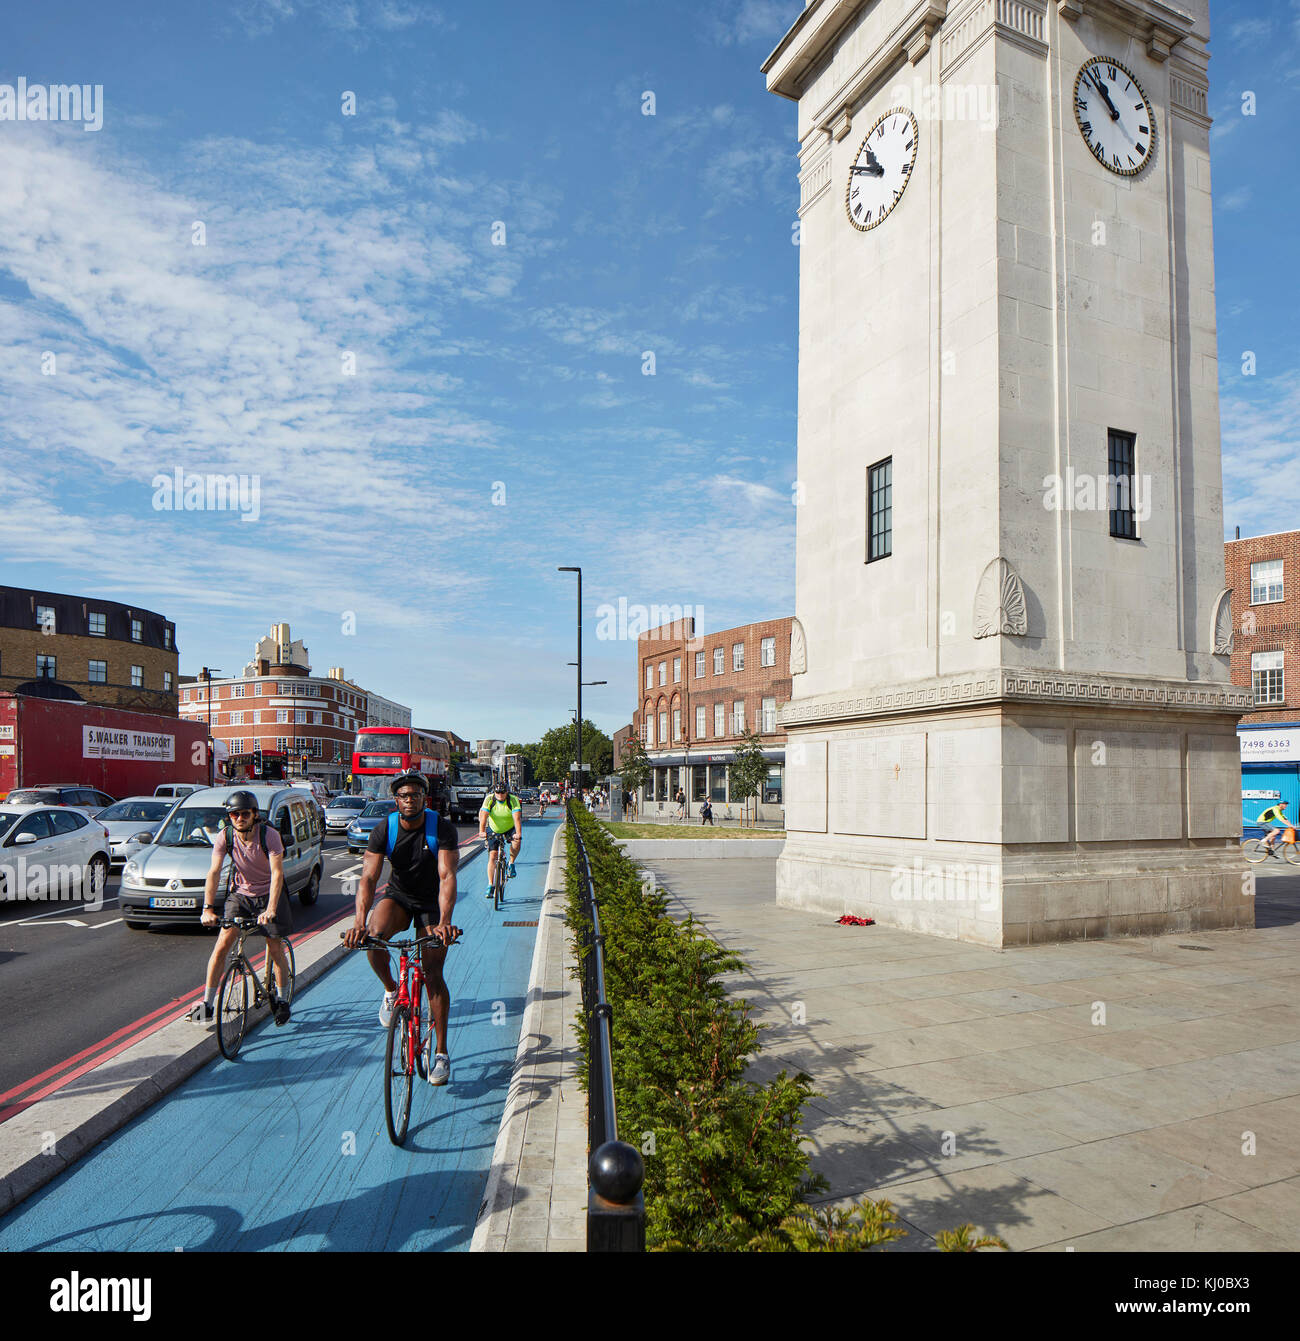 Stockwell War Memorial avec piste cyclable. Stockwell Framework Masterplan, Londres, Royaume-Uni. Architecte : DSDHA, 2017. Banque D'Images